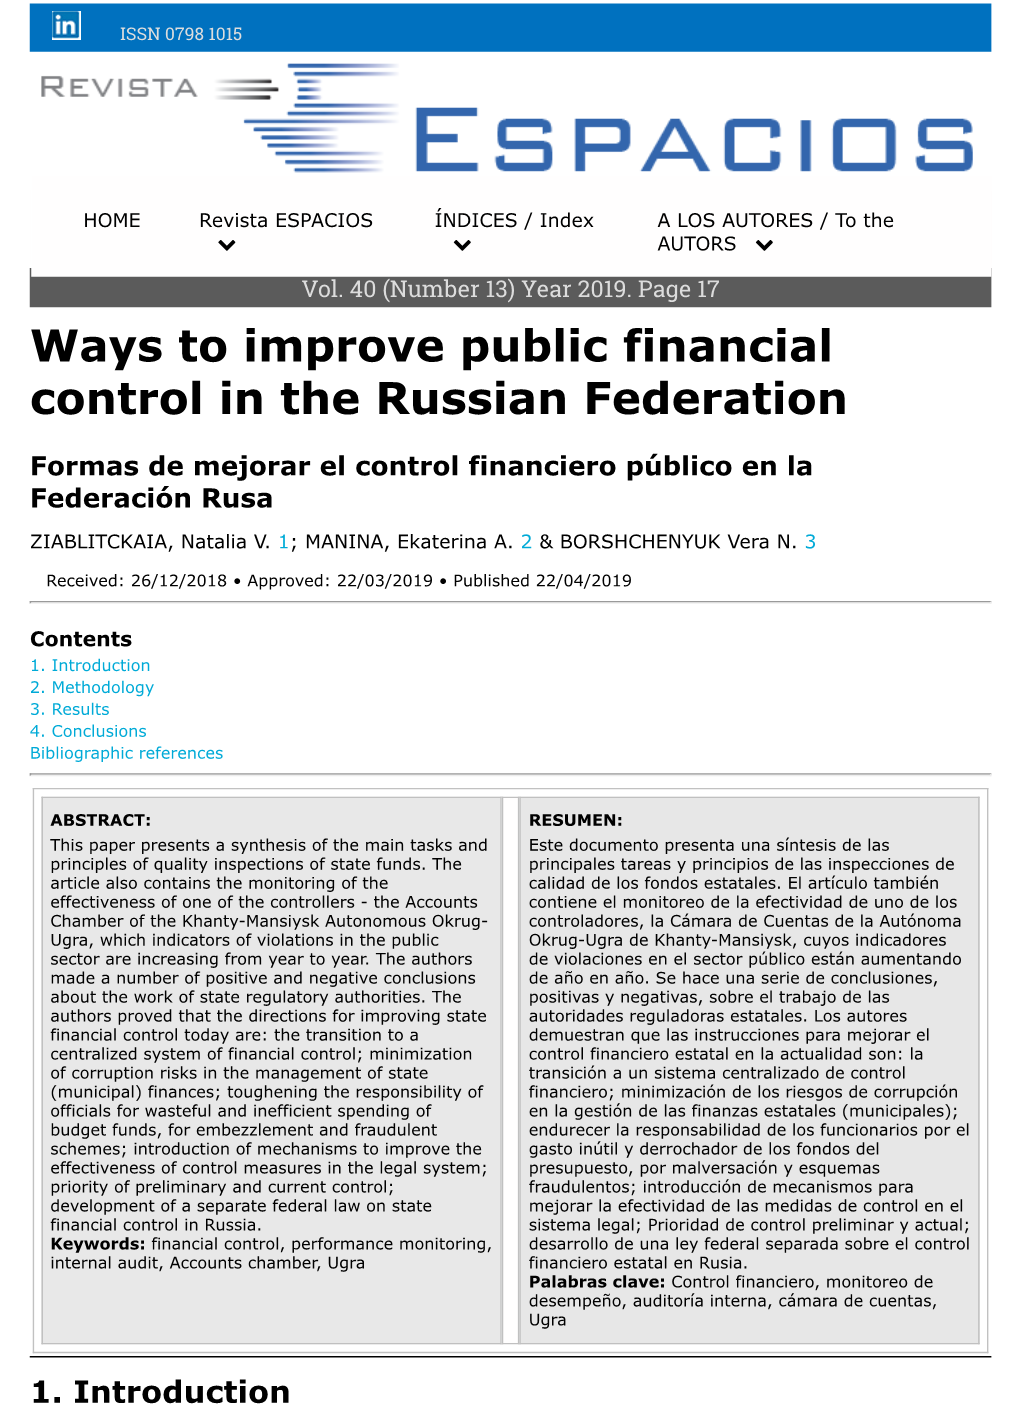 Ways to Improve Public Financial Control in the Russian Federation